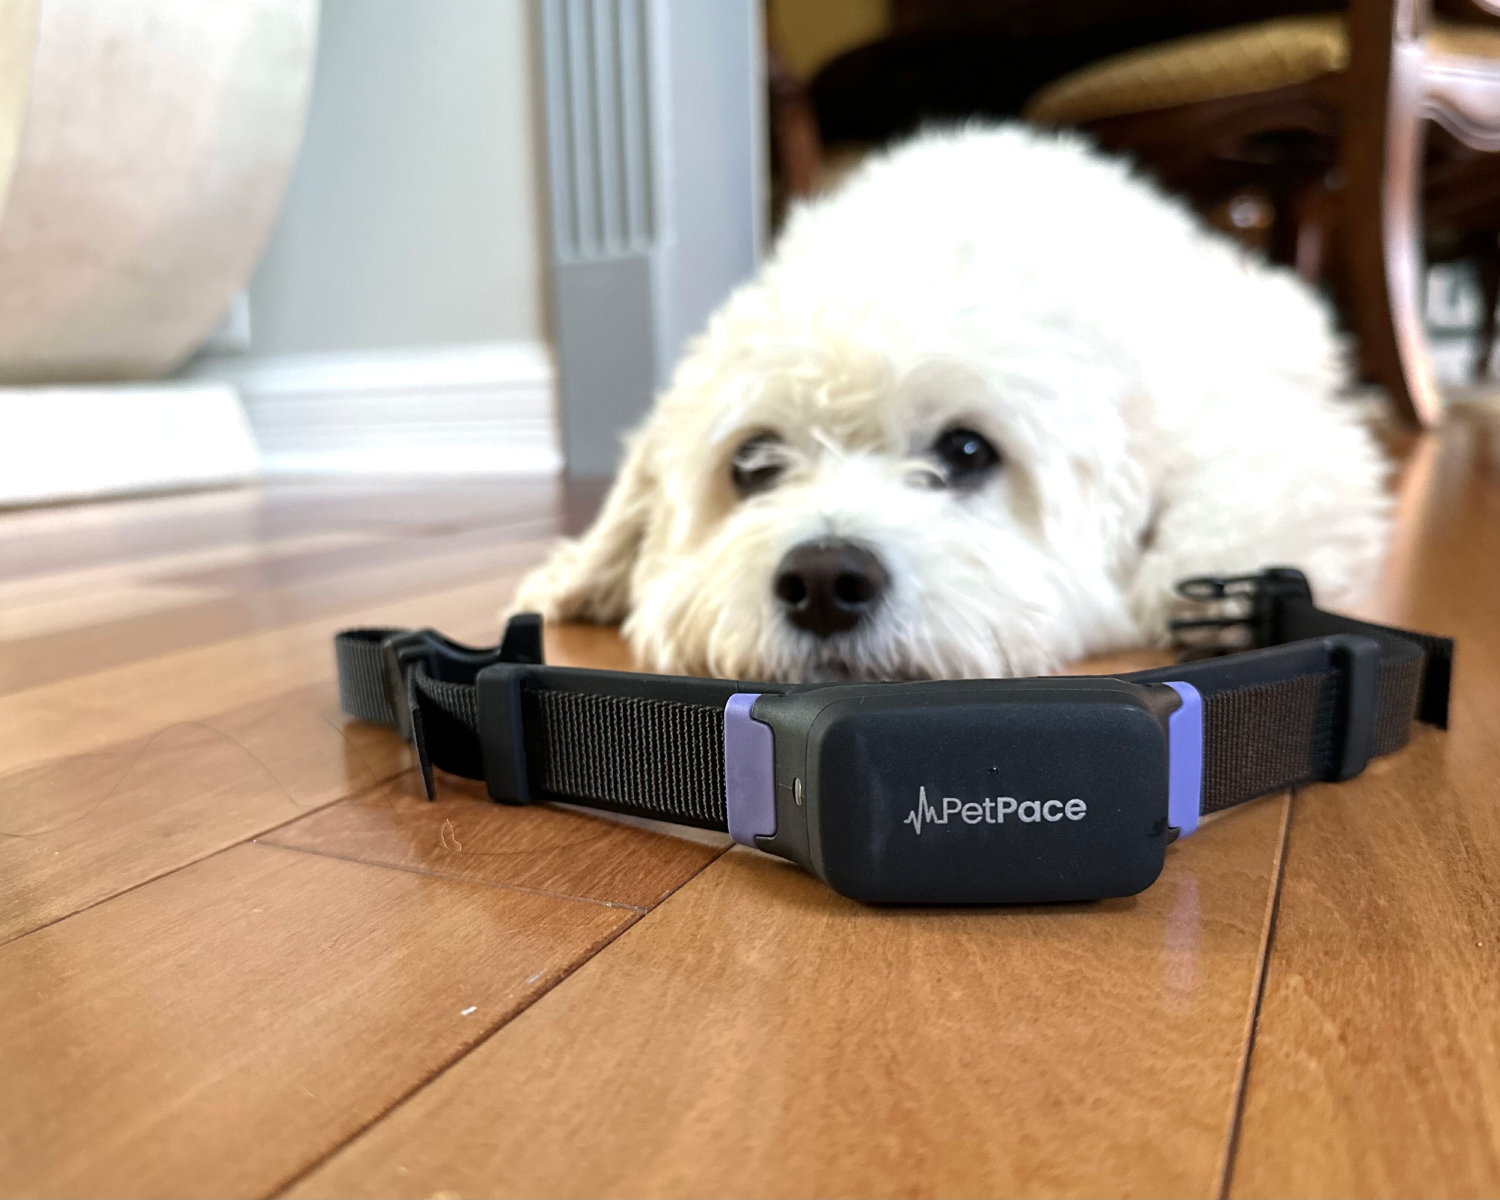 PetPace Smart Dog Collar - nora lying behind the product